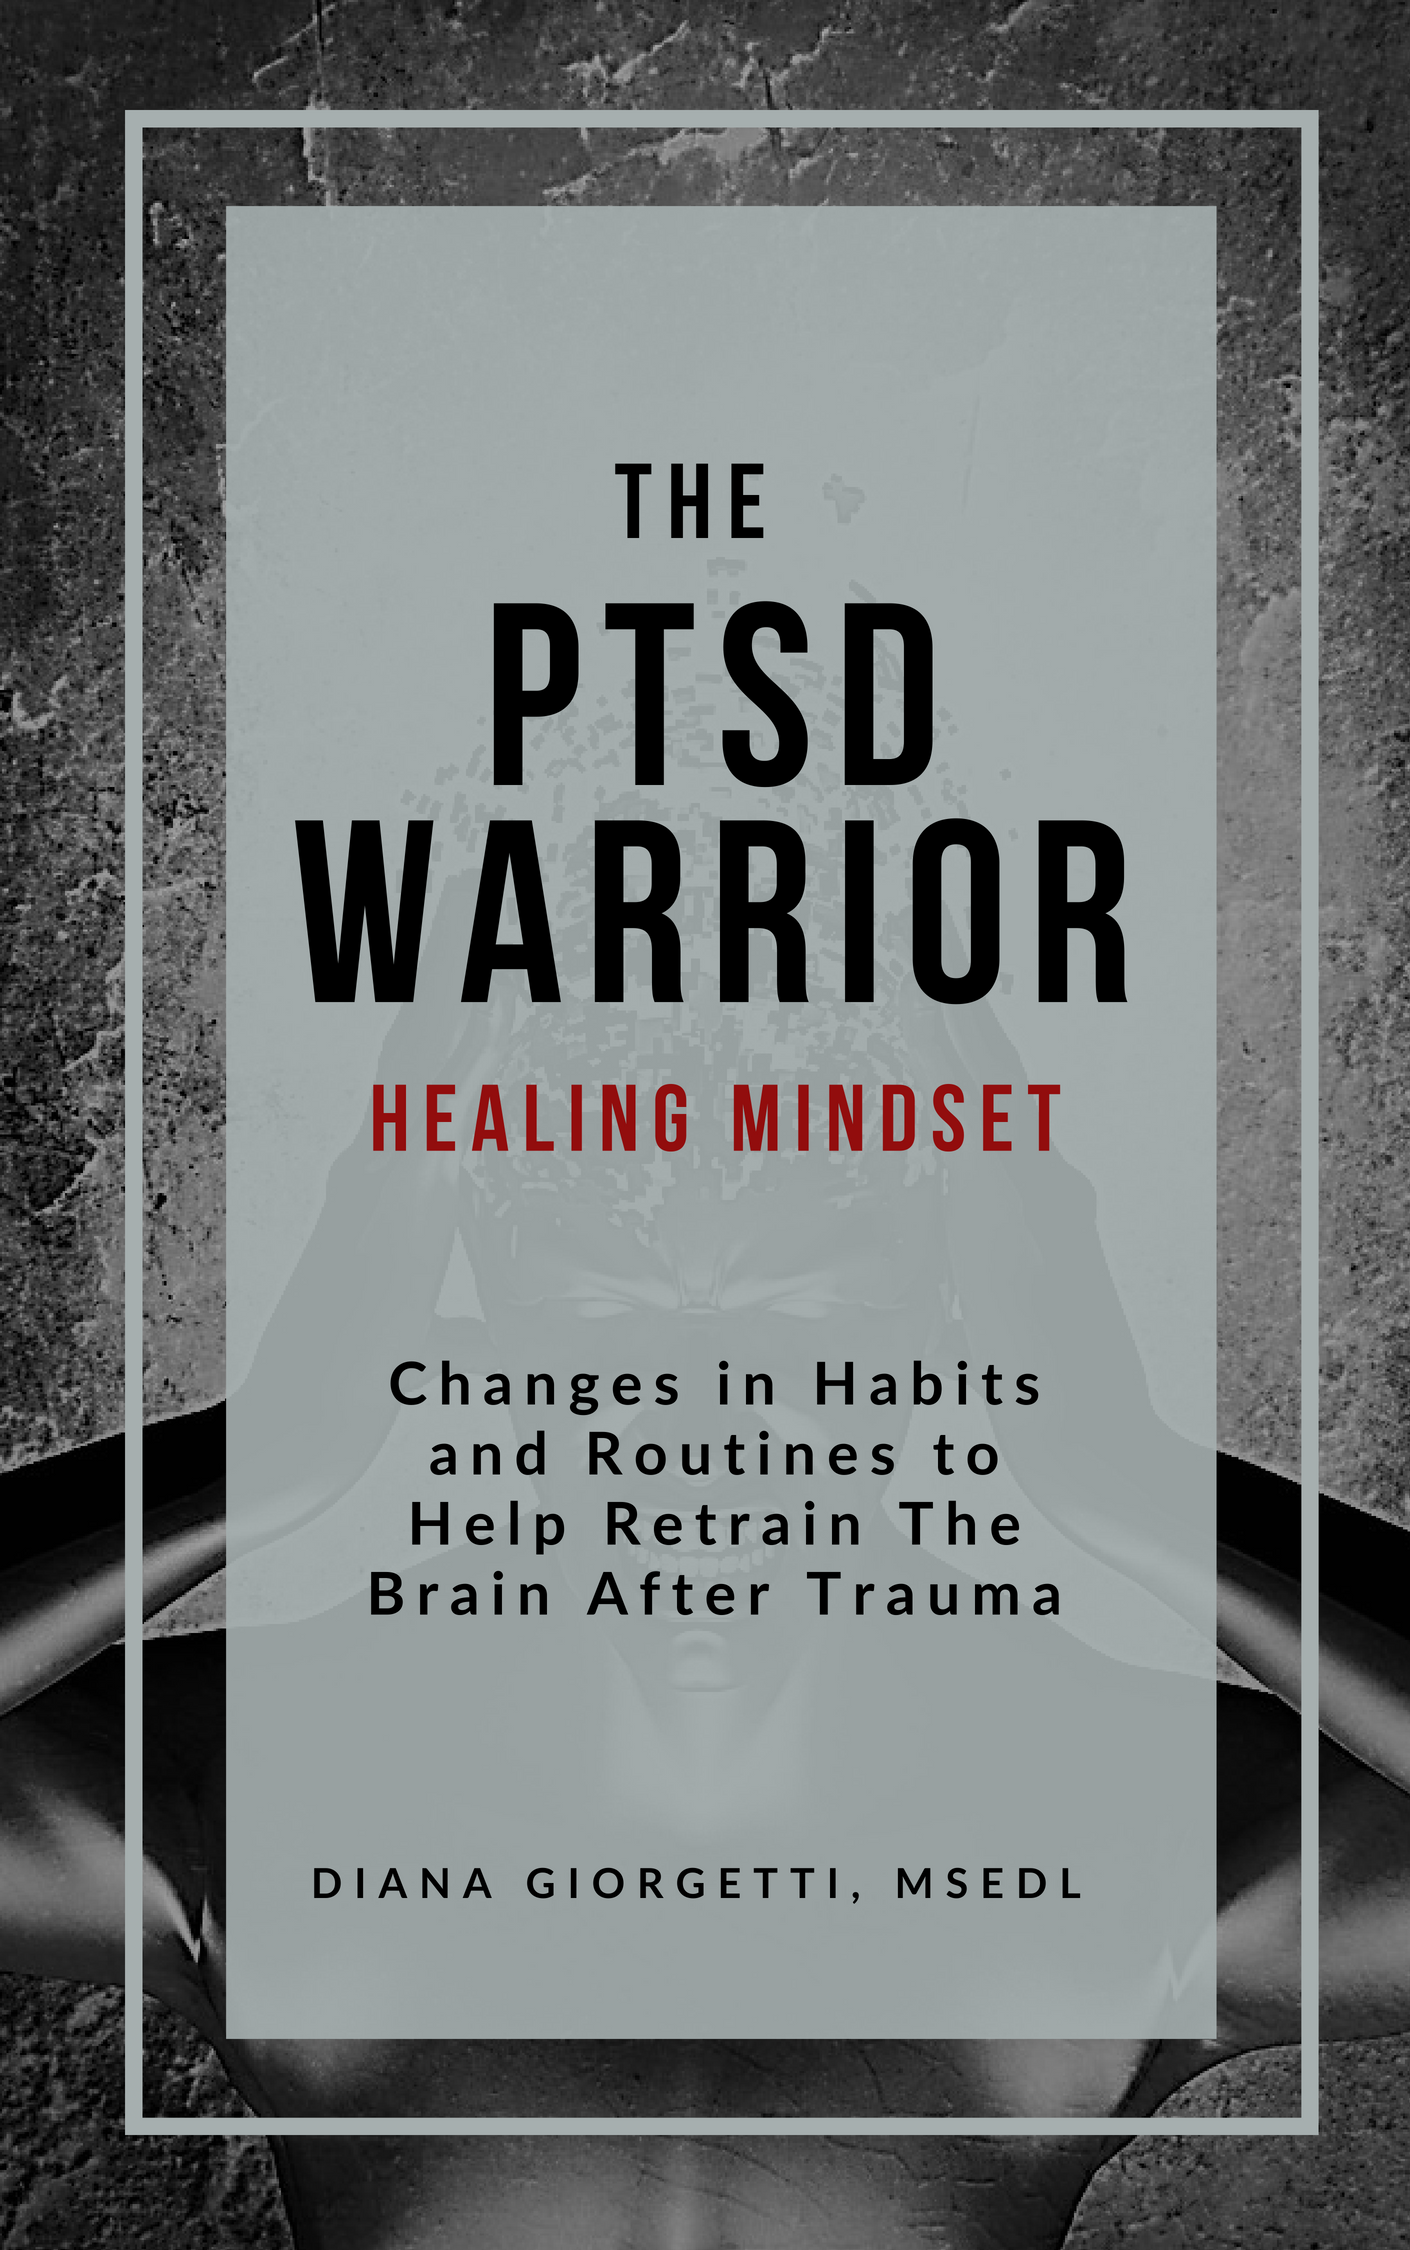 The PTSD Warrior Healing Mindset: Changes in Habits and Routines to Help Retrain the Brain After Trauma